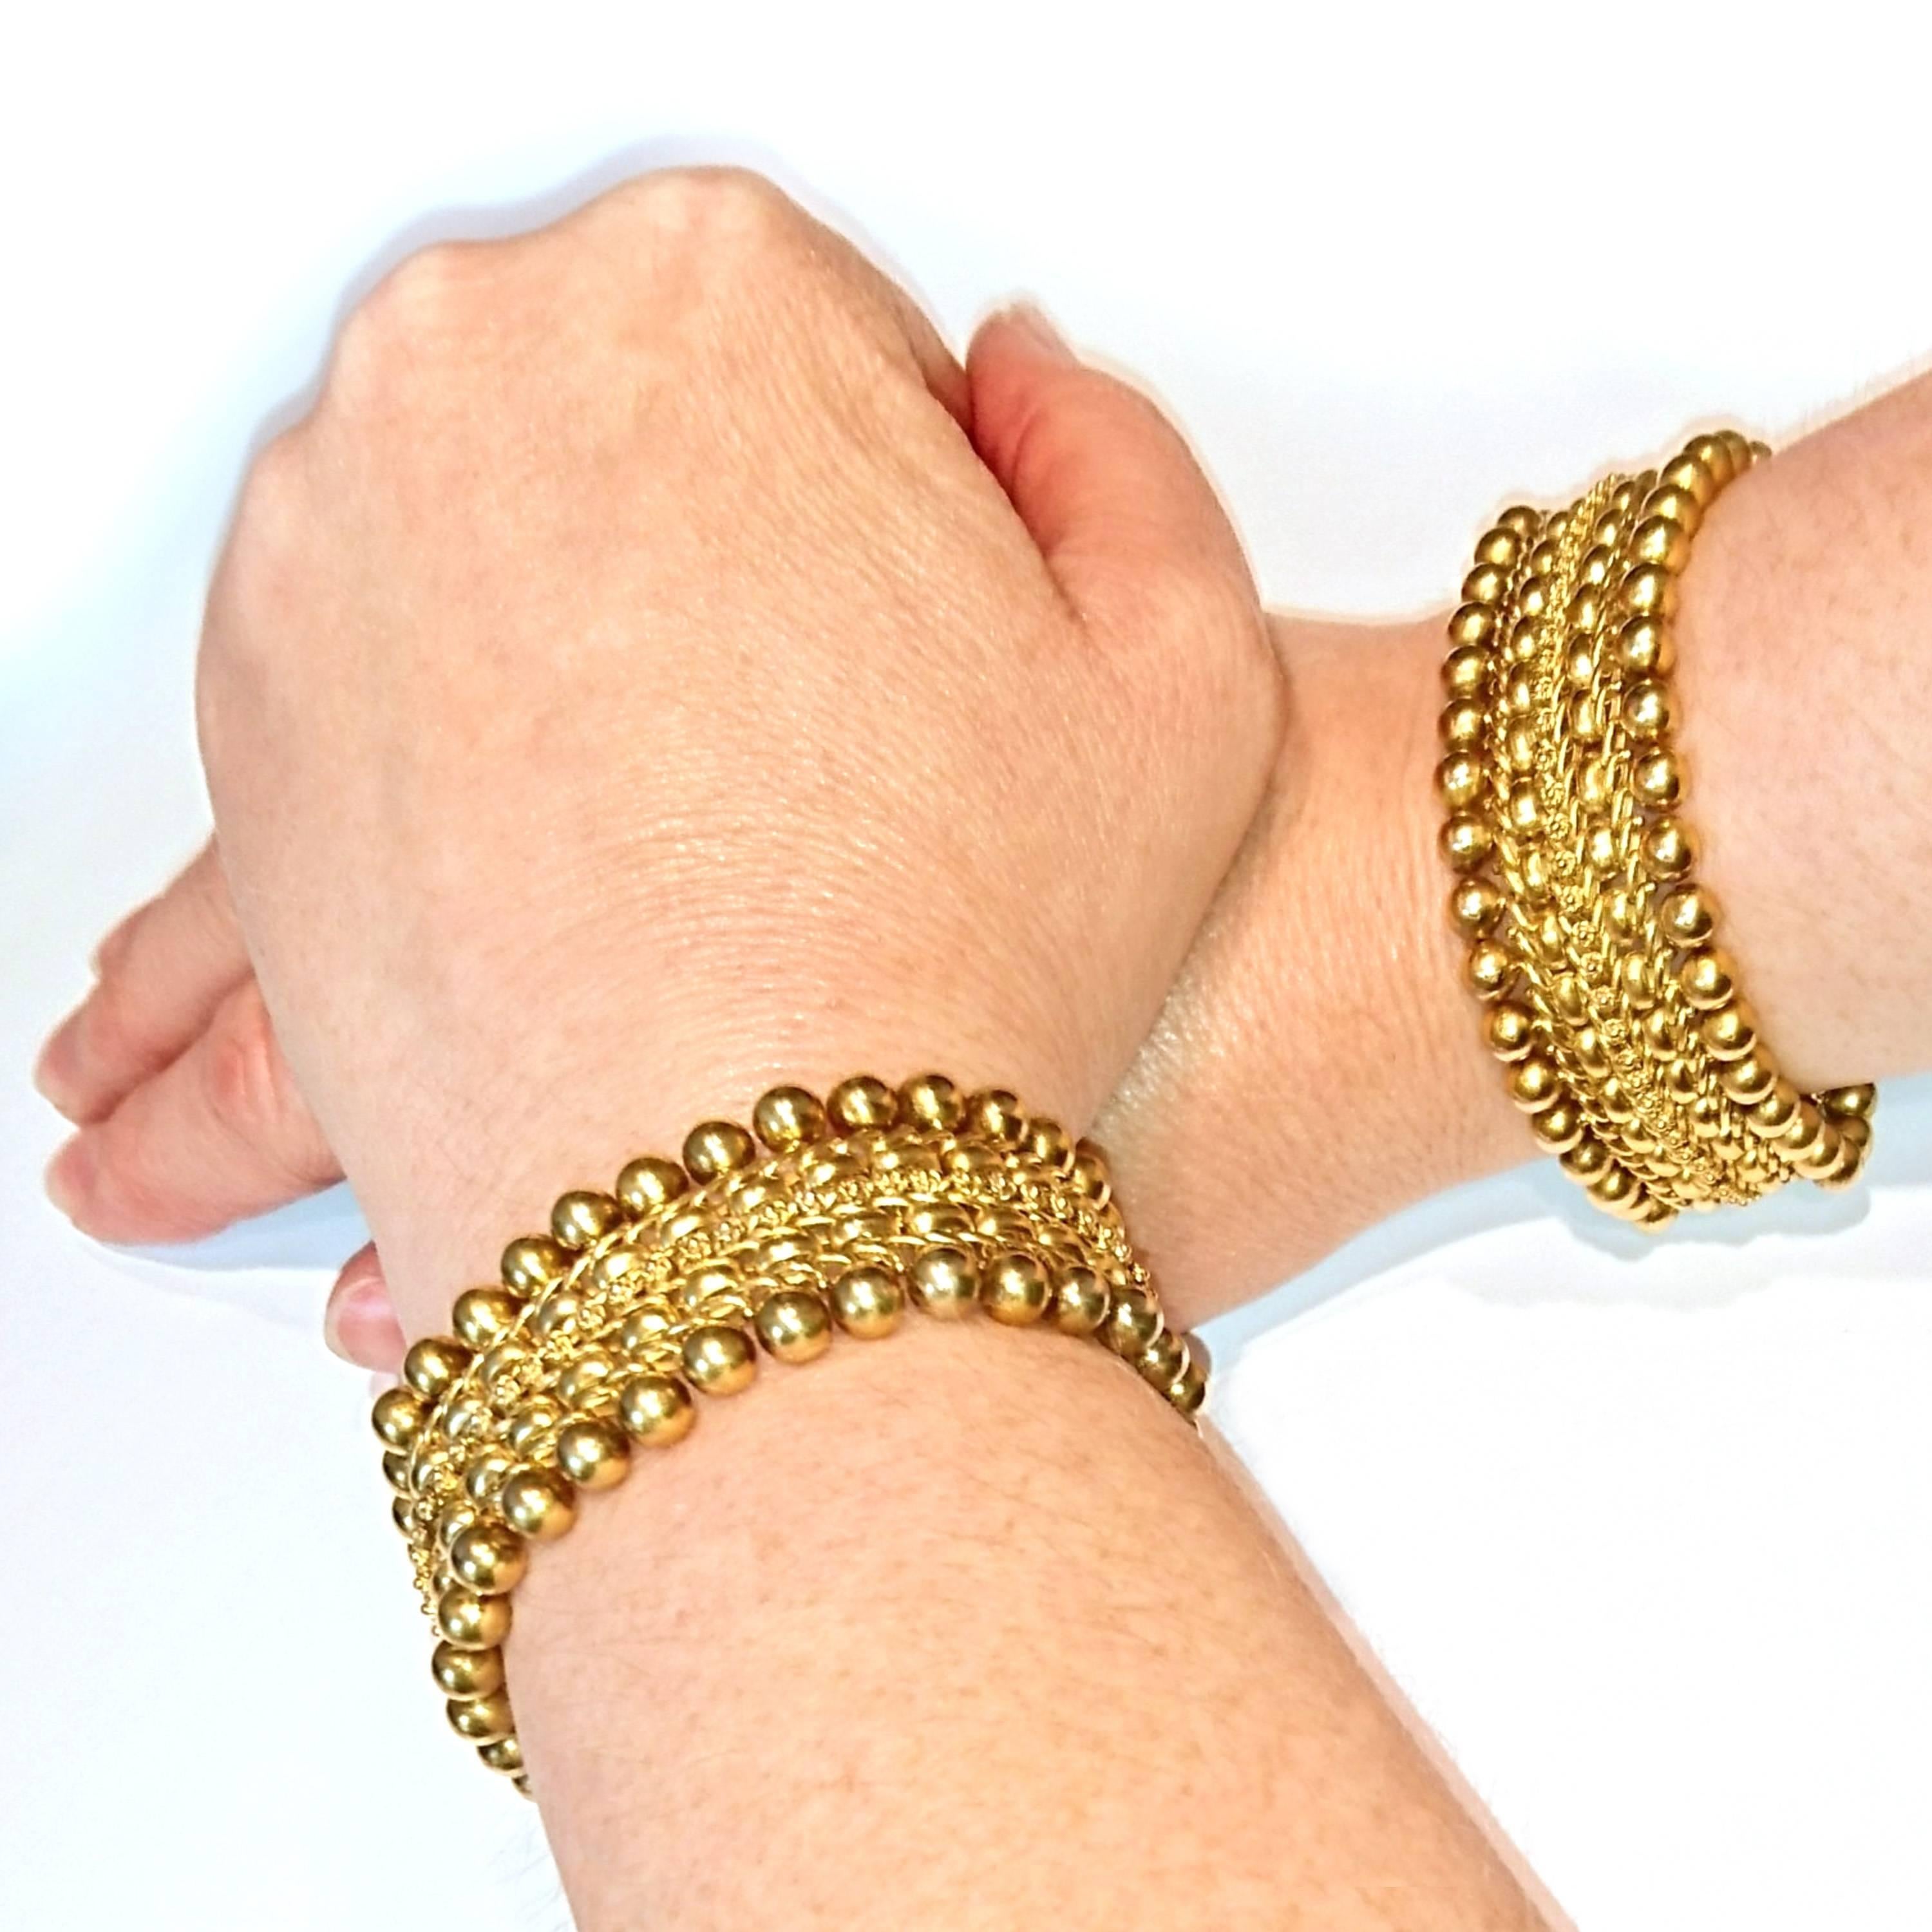 A pair of Victorian gold bracelets, with a woven design, featuring a row of flowers, superimposed on V shaped links, flanked by D cross-section links and diagonal links, with gold bead detail to each edge. The bracelets can be put together, to wear